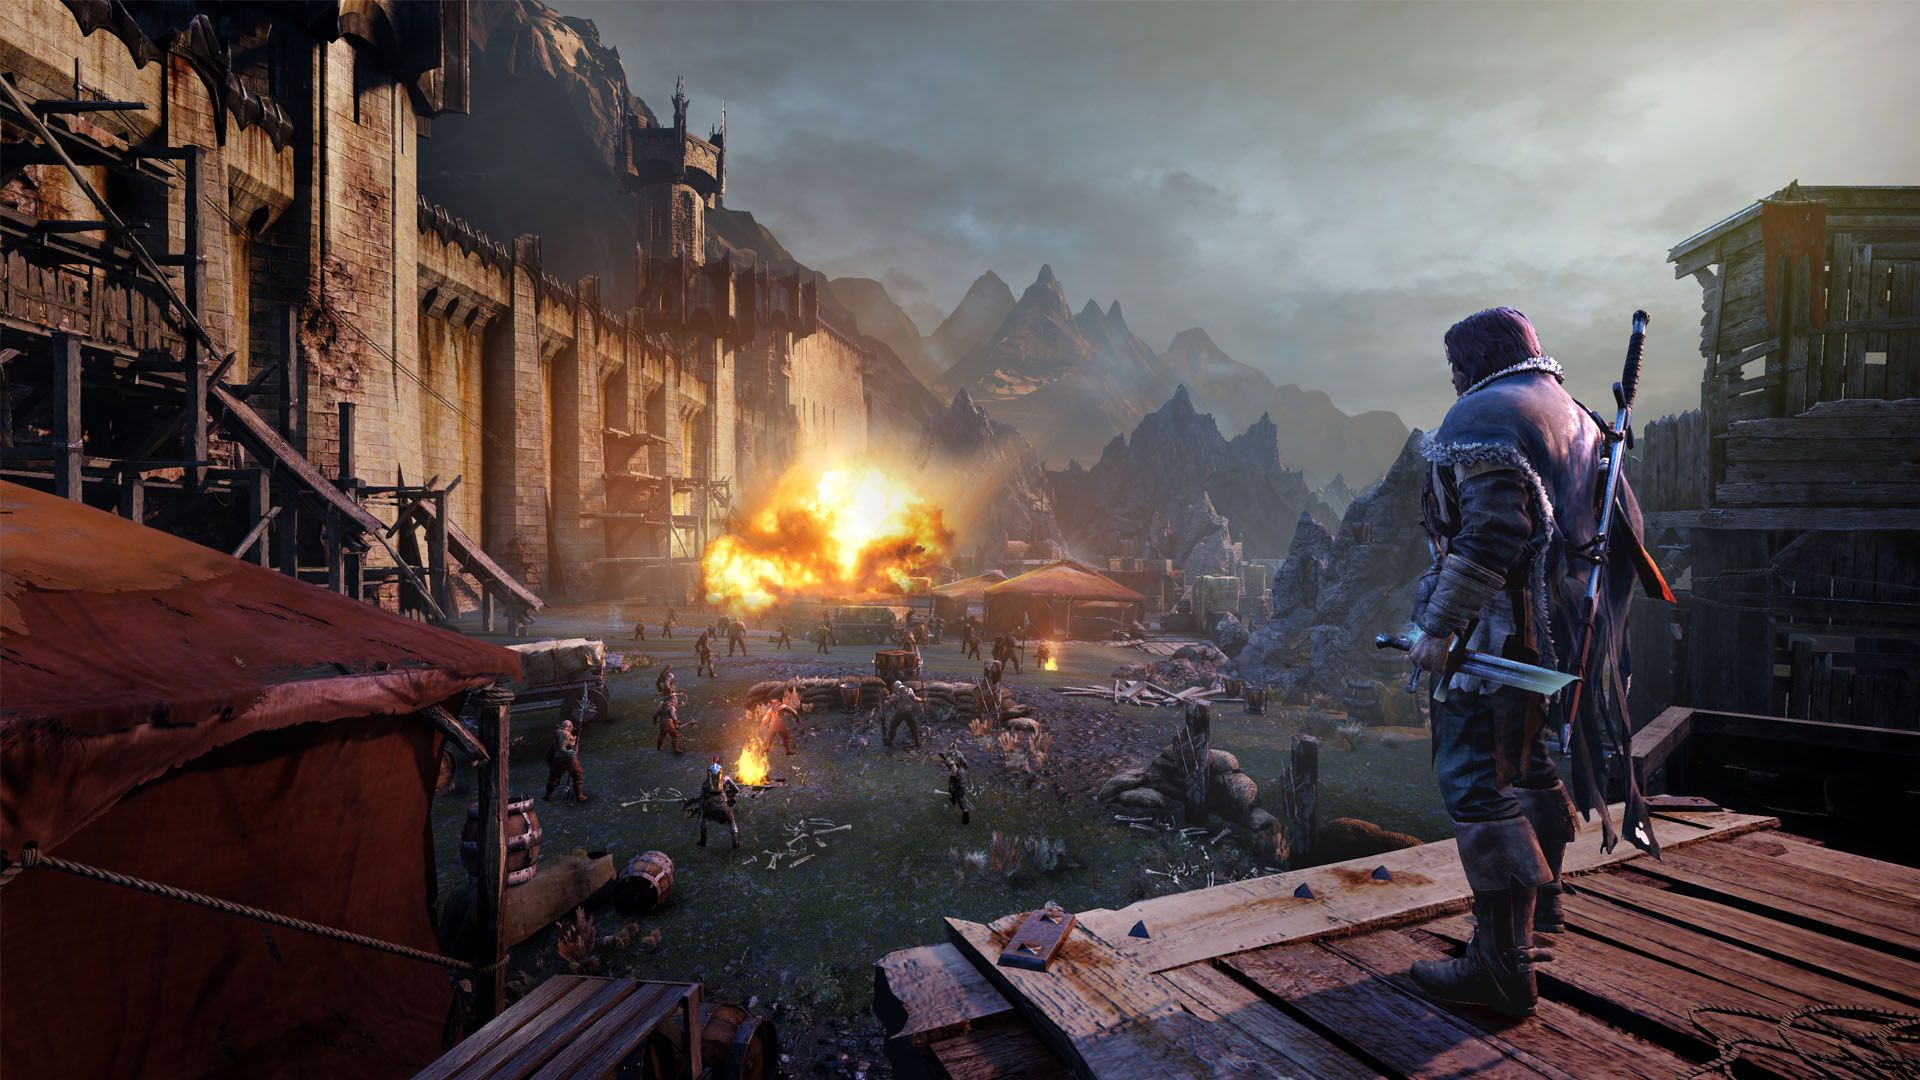 Middle-earth: Shadow of Mordor - PCGamingWiki PCGW - bugs, fixes, crashes,  mods, guides and improvements for every PC game